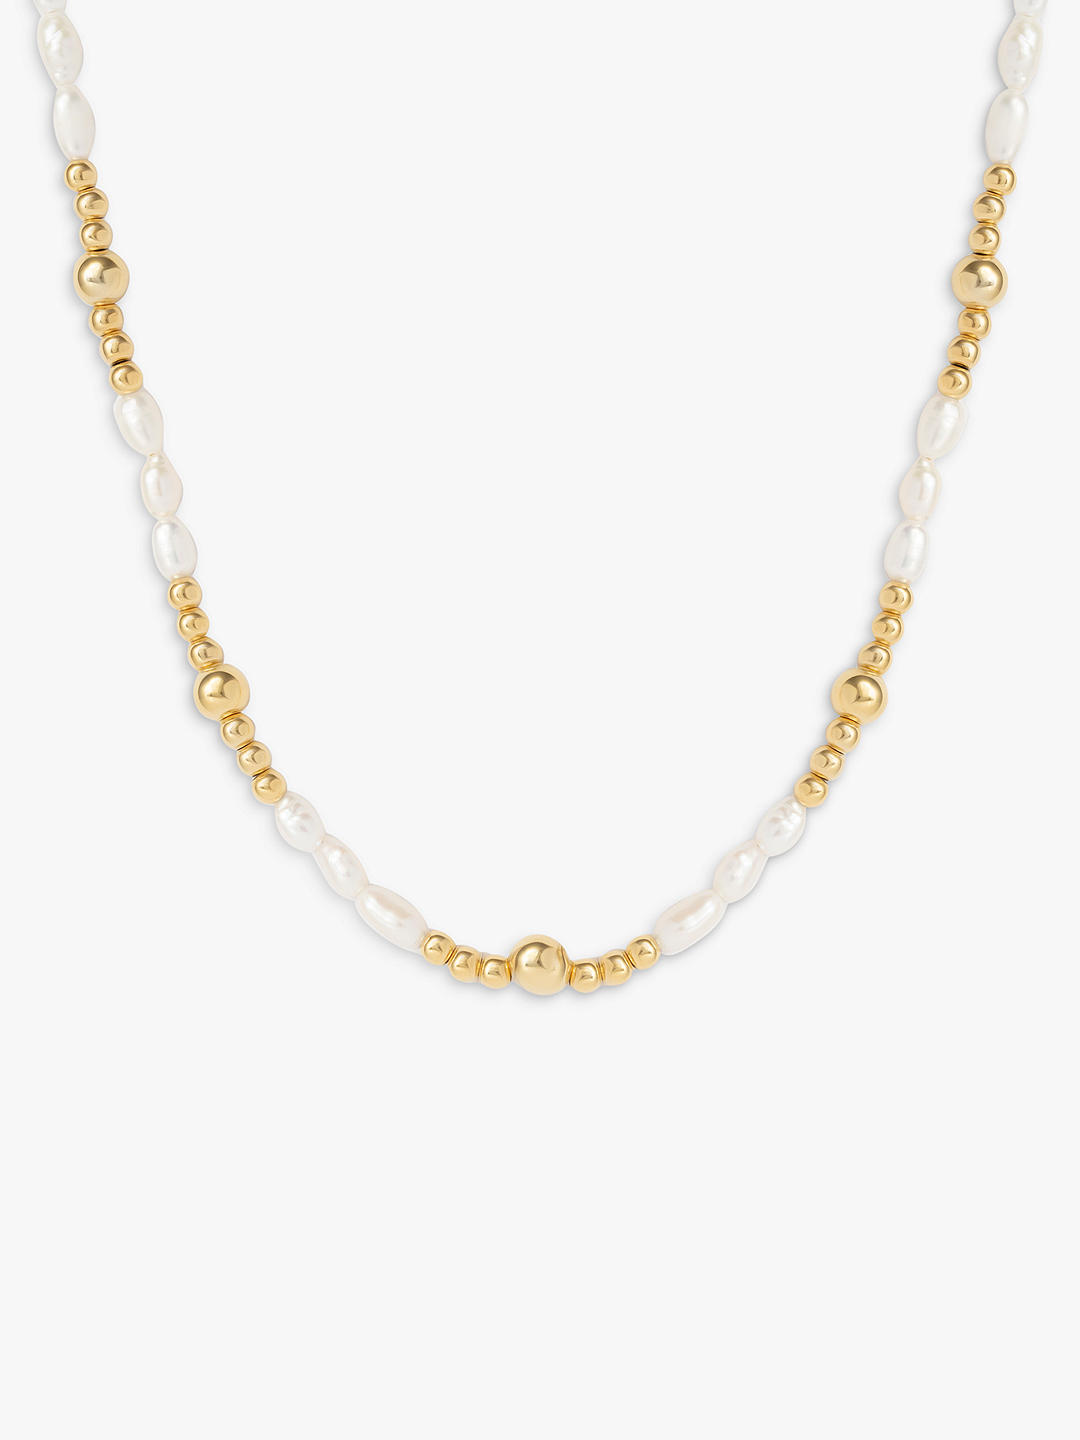 LARNAUTI Annecy Freshwater Pearl Beaded Necklace, Gold/White